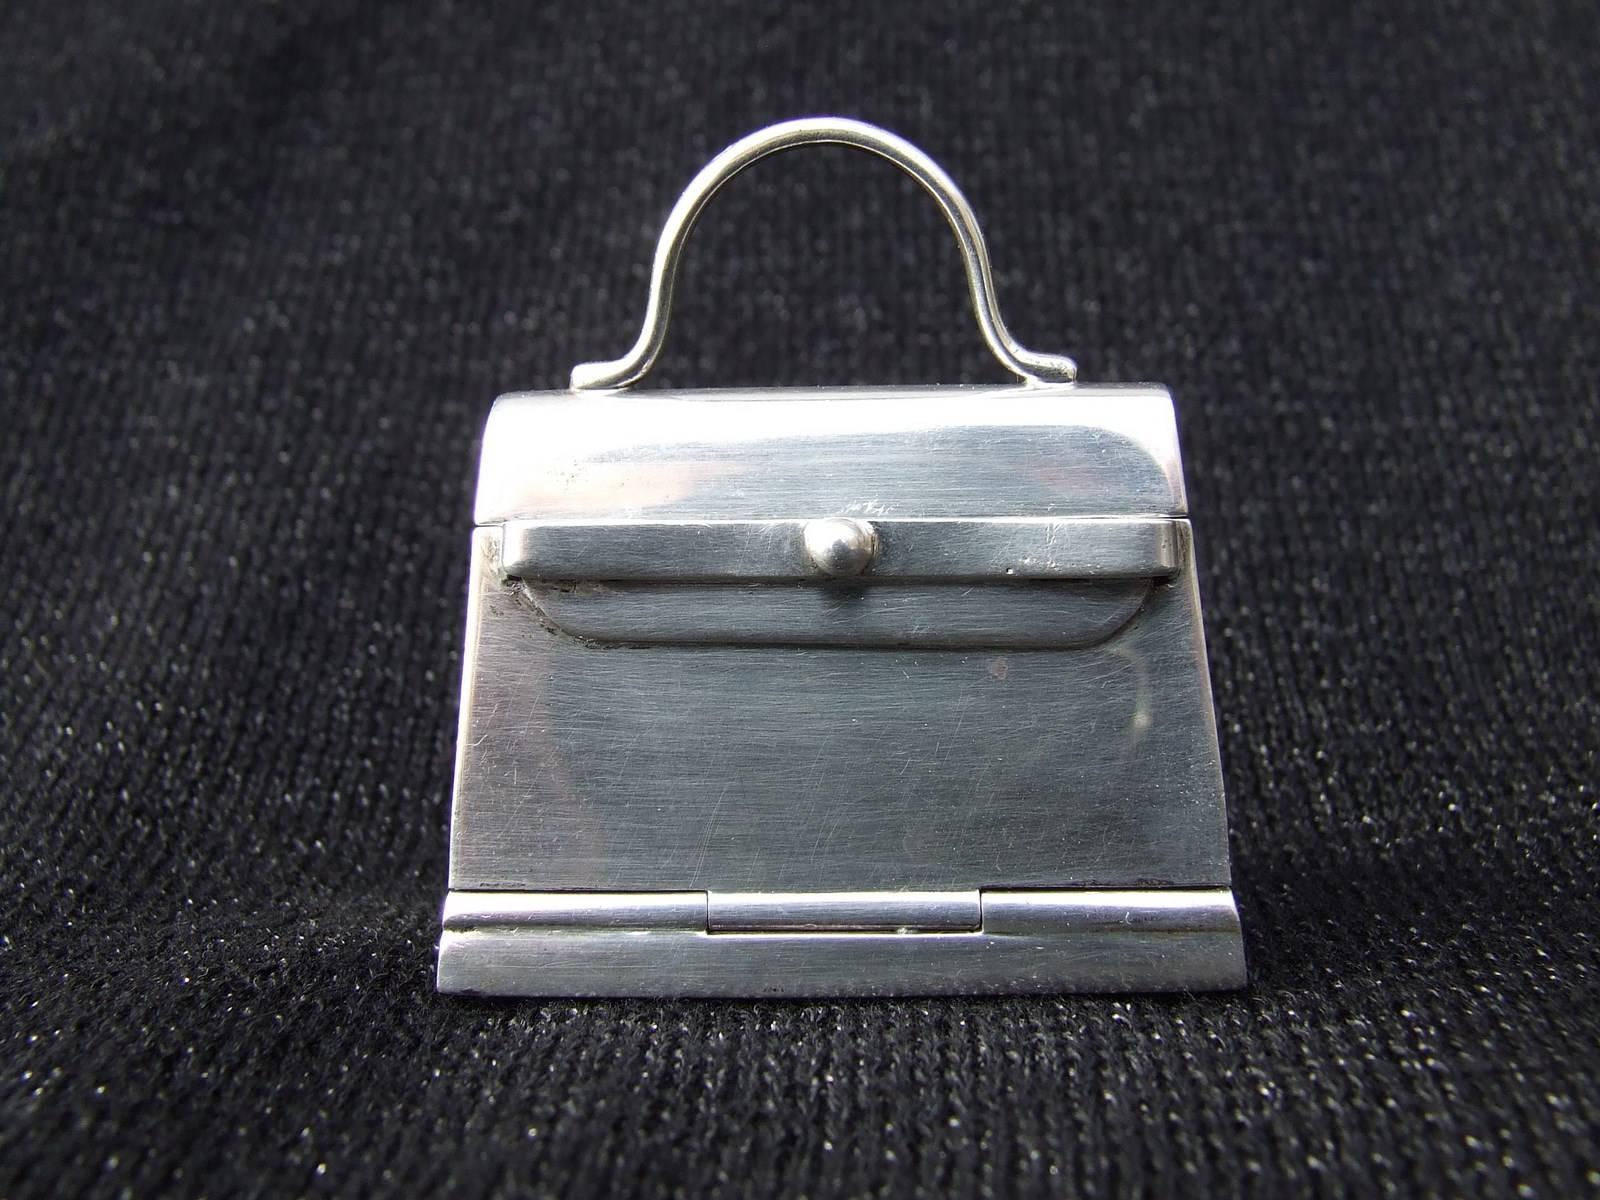 Beautiful Authentic Hermes Pill Box

Mini Kelly Bag Pattern

Made of 925 Silver

Opens by the front

3 punches on the handle

